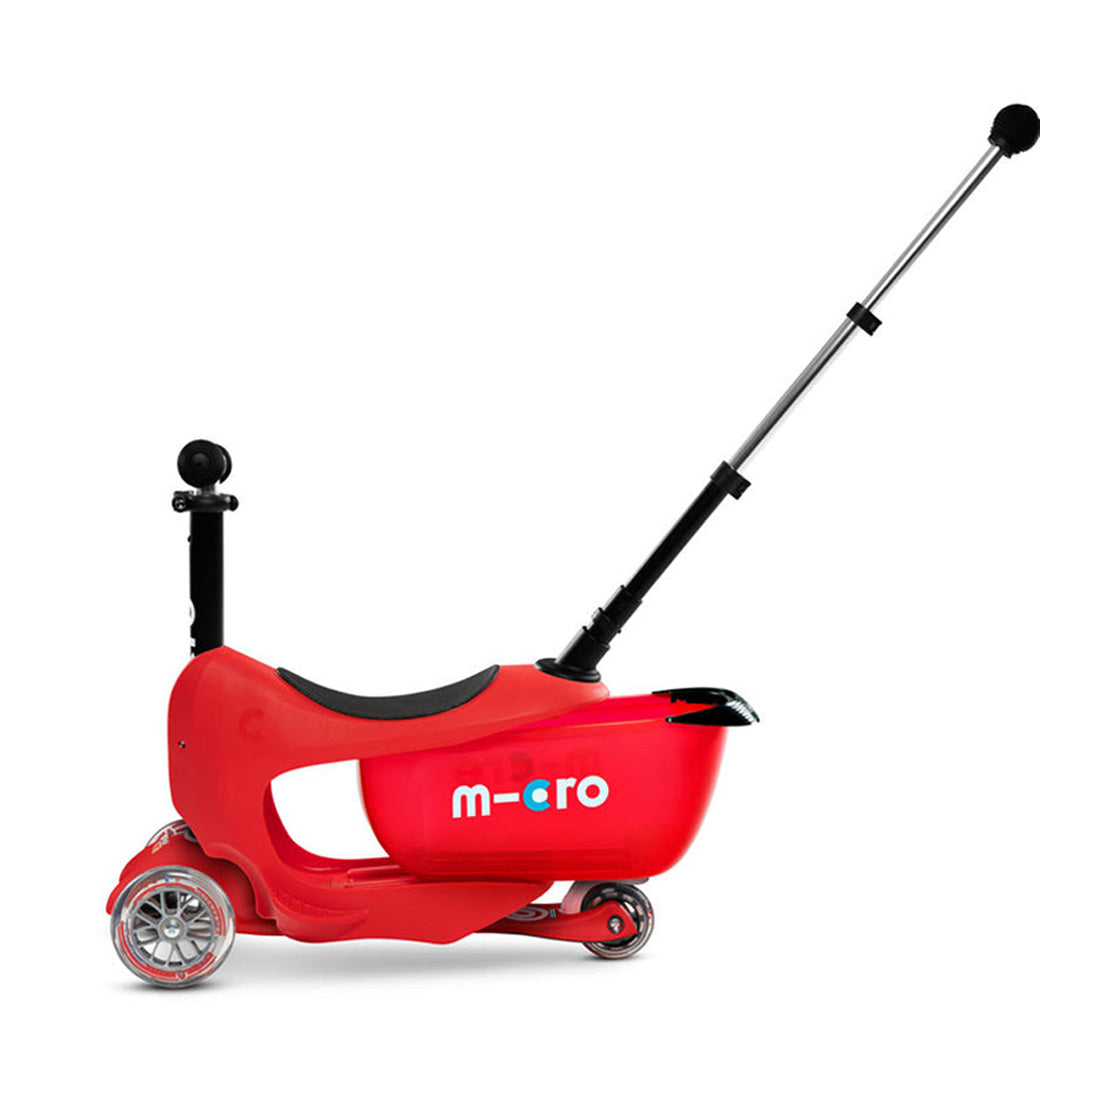 Micro Mini 2Go Deluxe Plus - Red Scooter Completes Rec